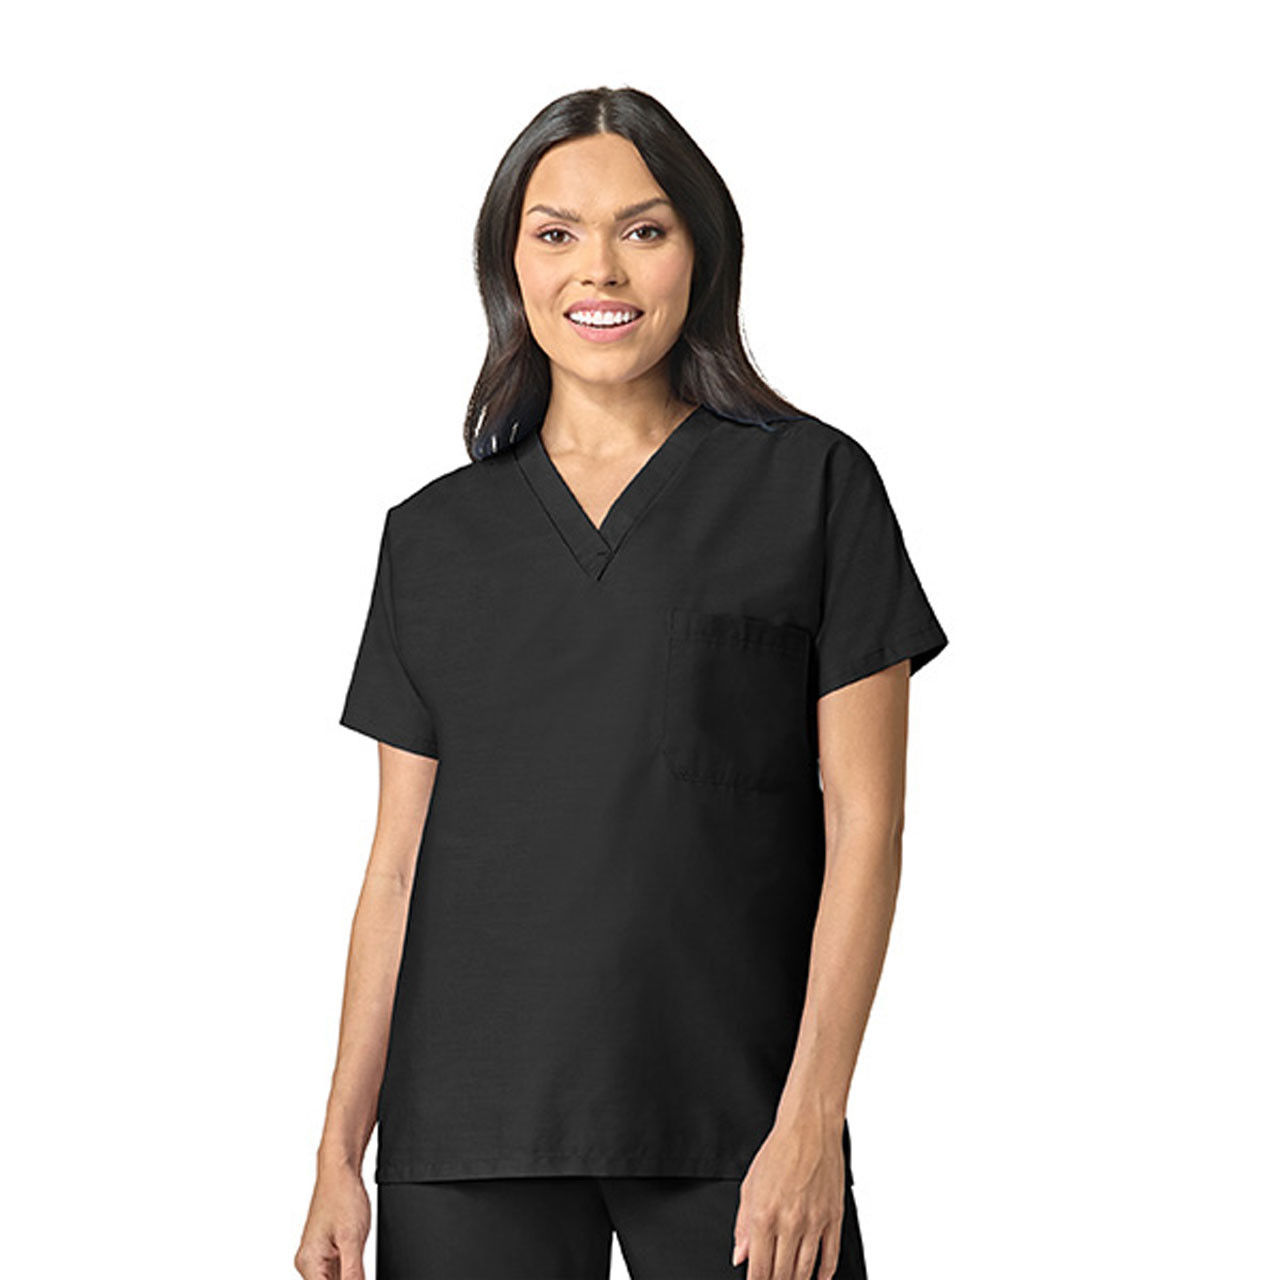 Are the Black Scrub Tops durable and comfortable?